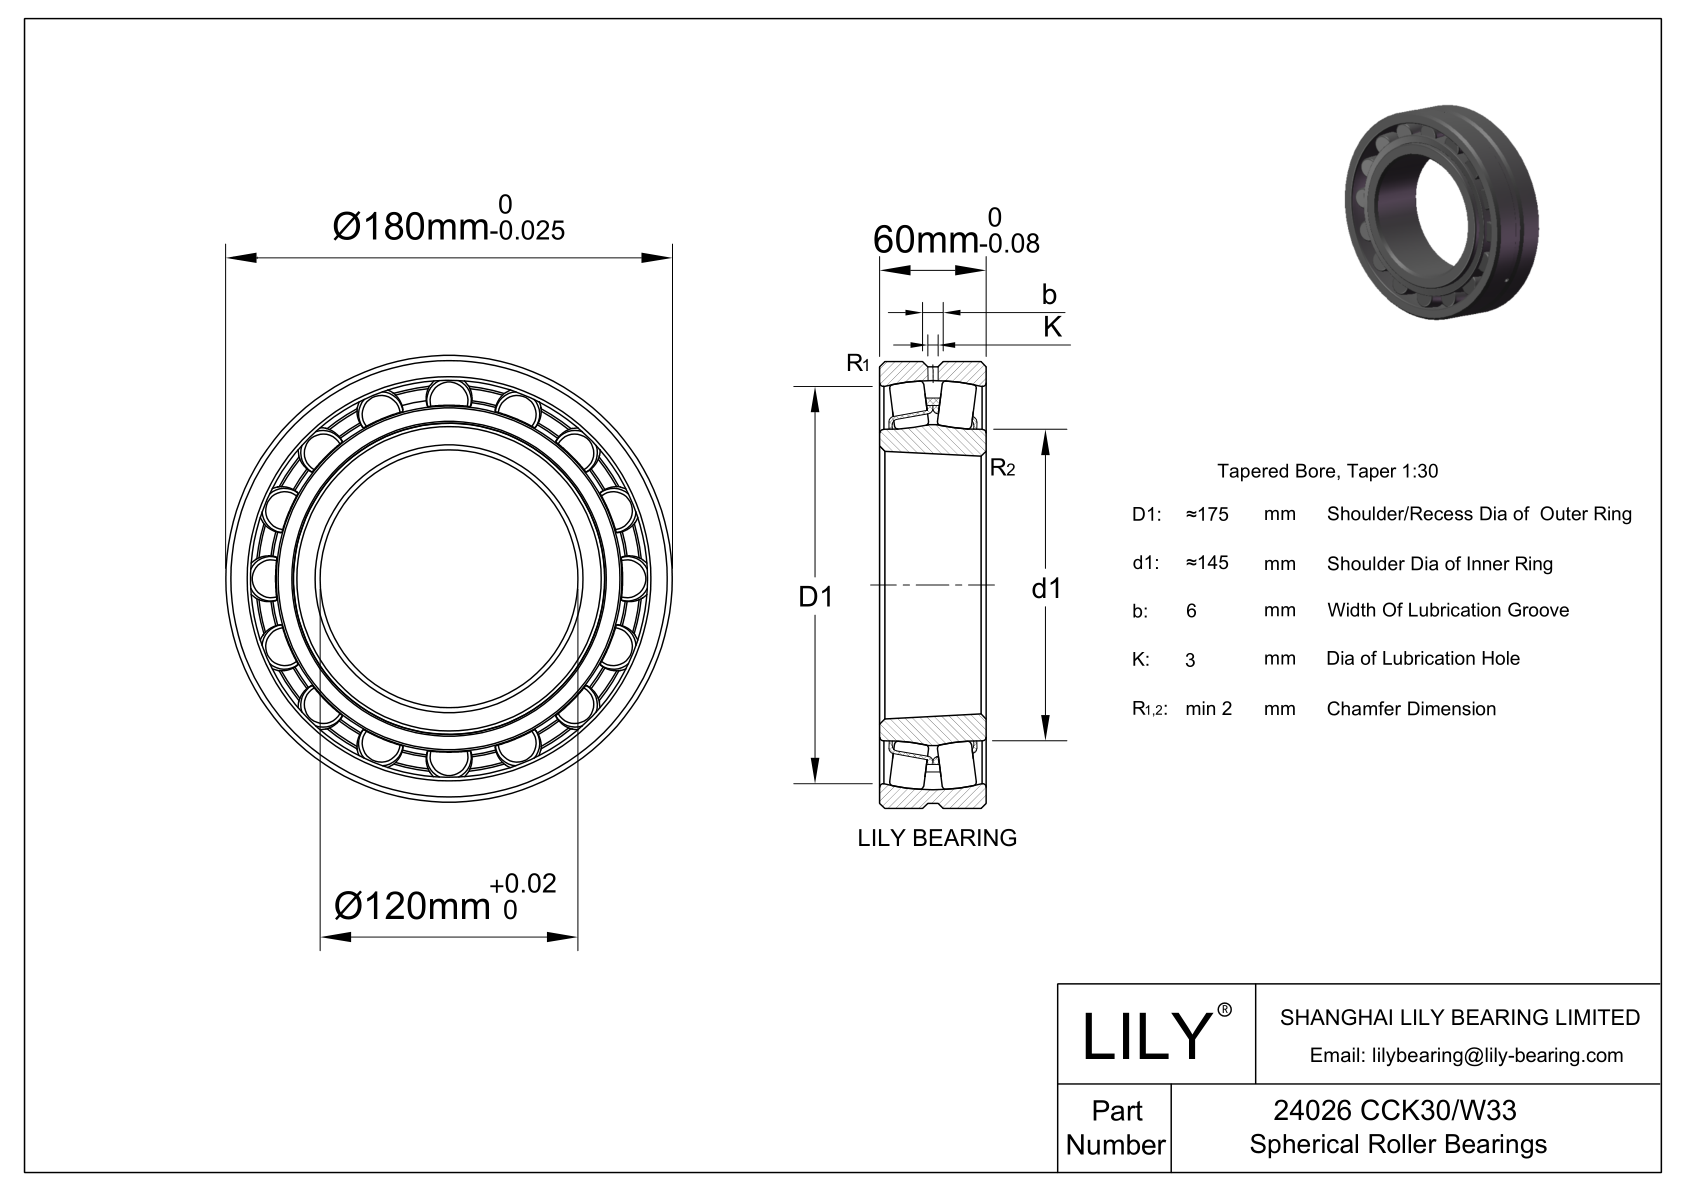 24026 CCK30/W33 Double Row Spherical Roller Bearing cad drawing